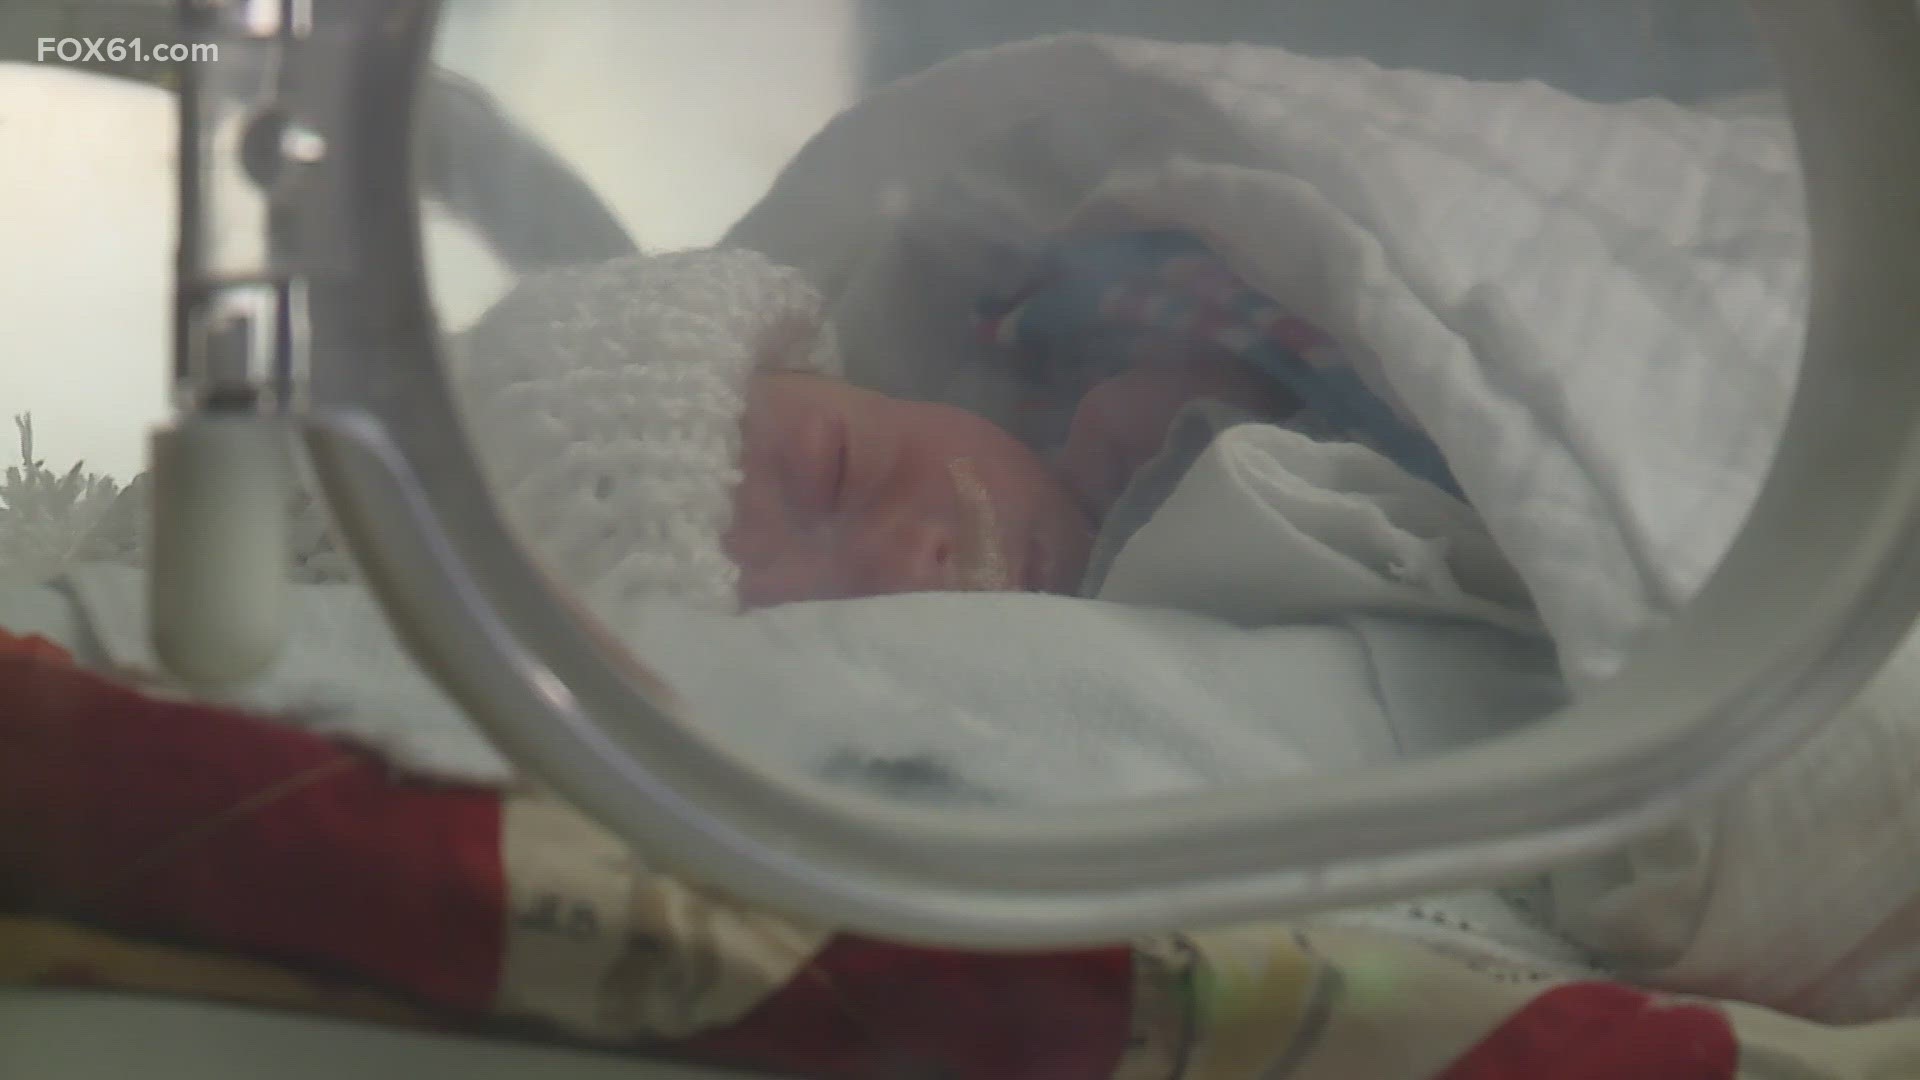 Connecticut Safe Haven Act gives hope to parents wanting children | fox61. com